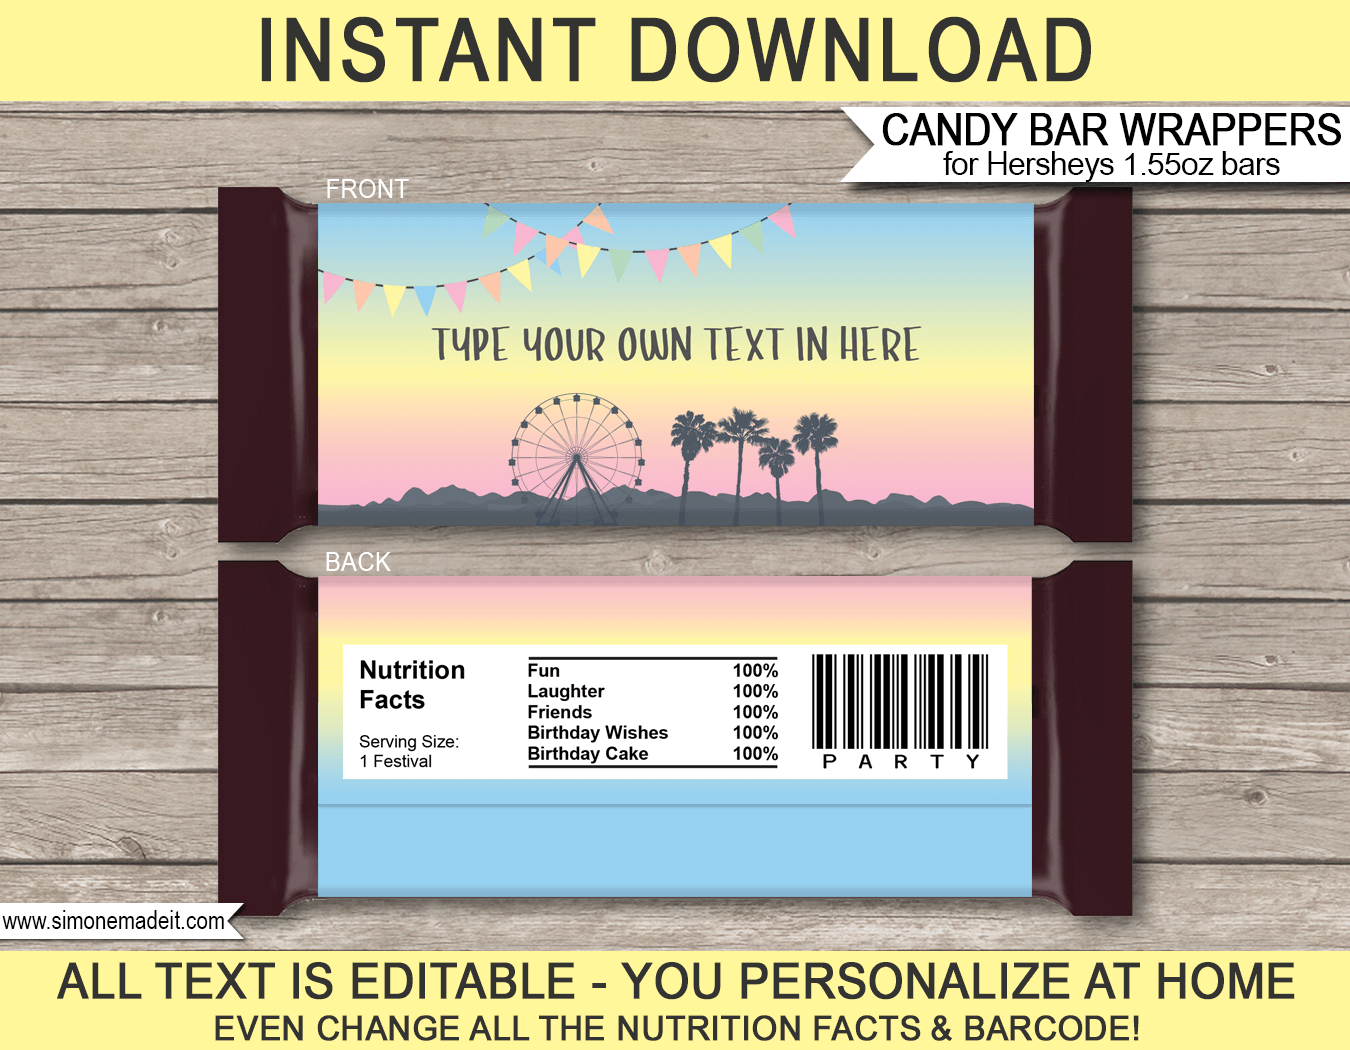 Printable Coachella Themed Party Candy Bar Wrappers | Festival Birthday Party Favors | Personalized Hershey Candy Bars | Editable Template | INSTANT DOWNLOAD via simonemadeit.com